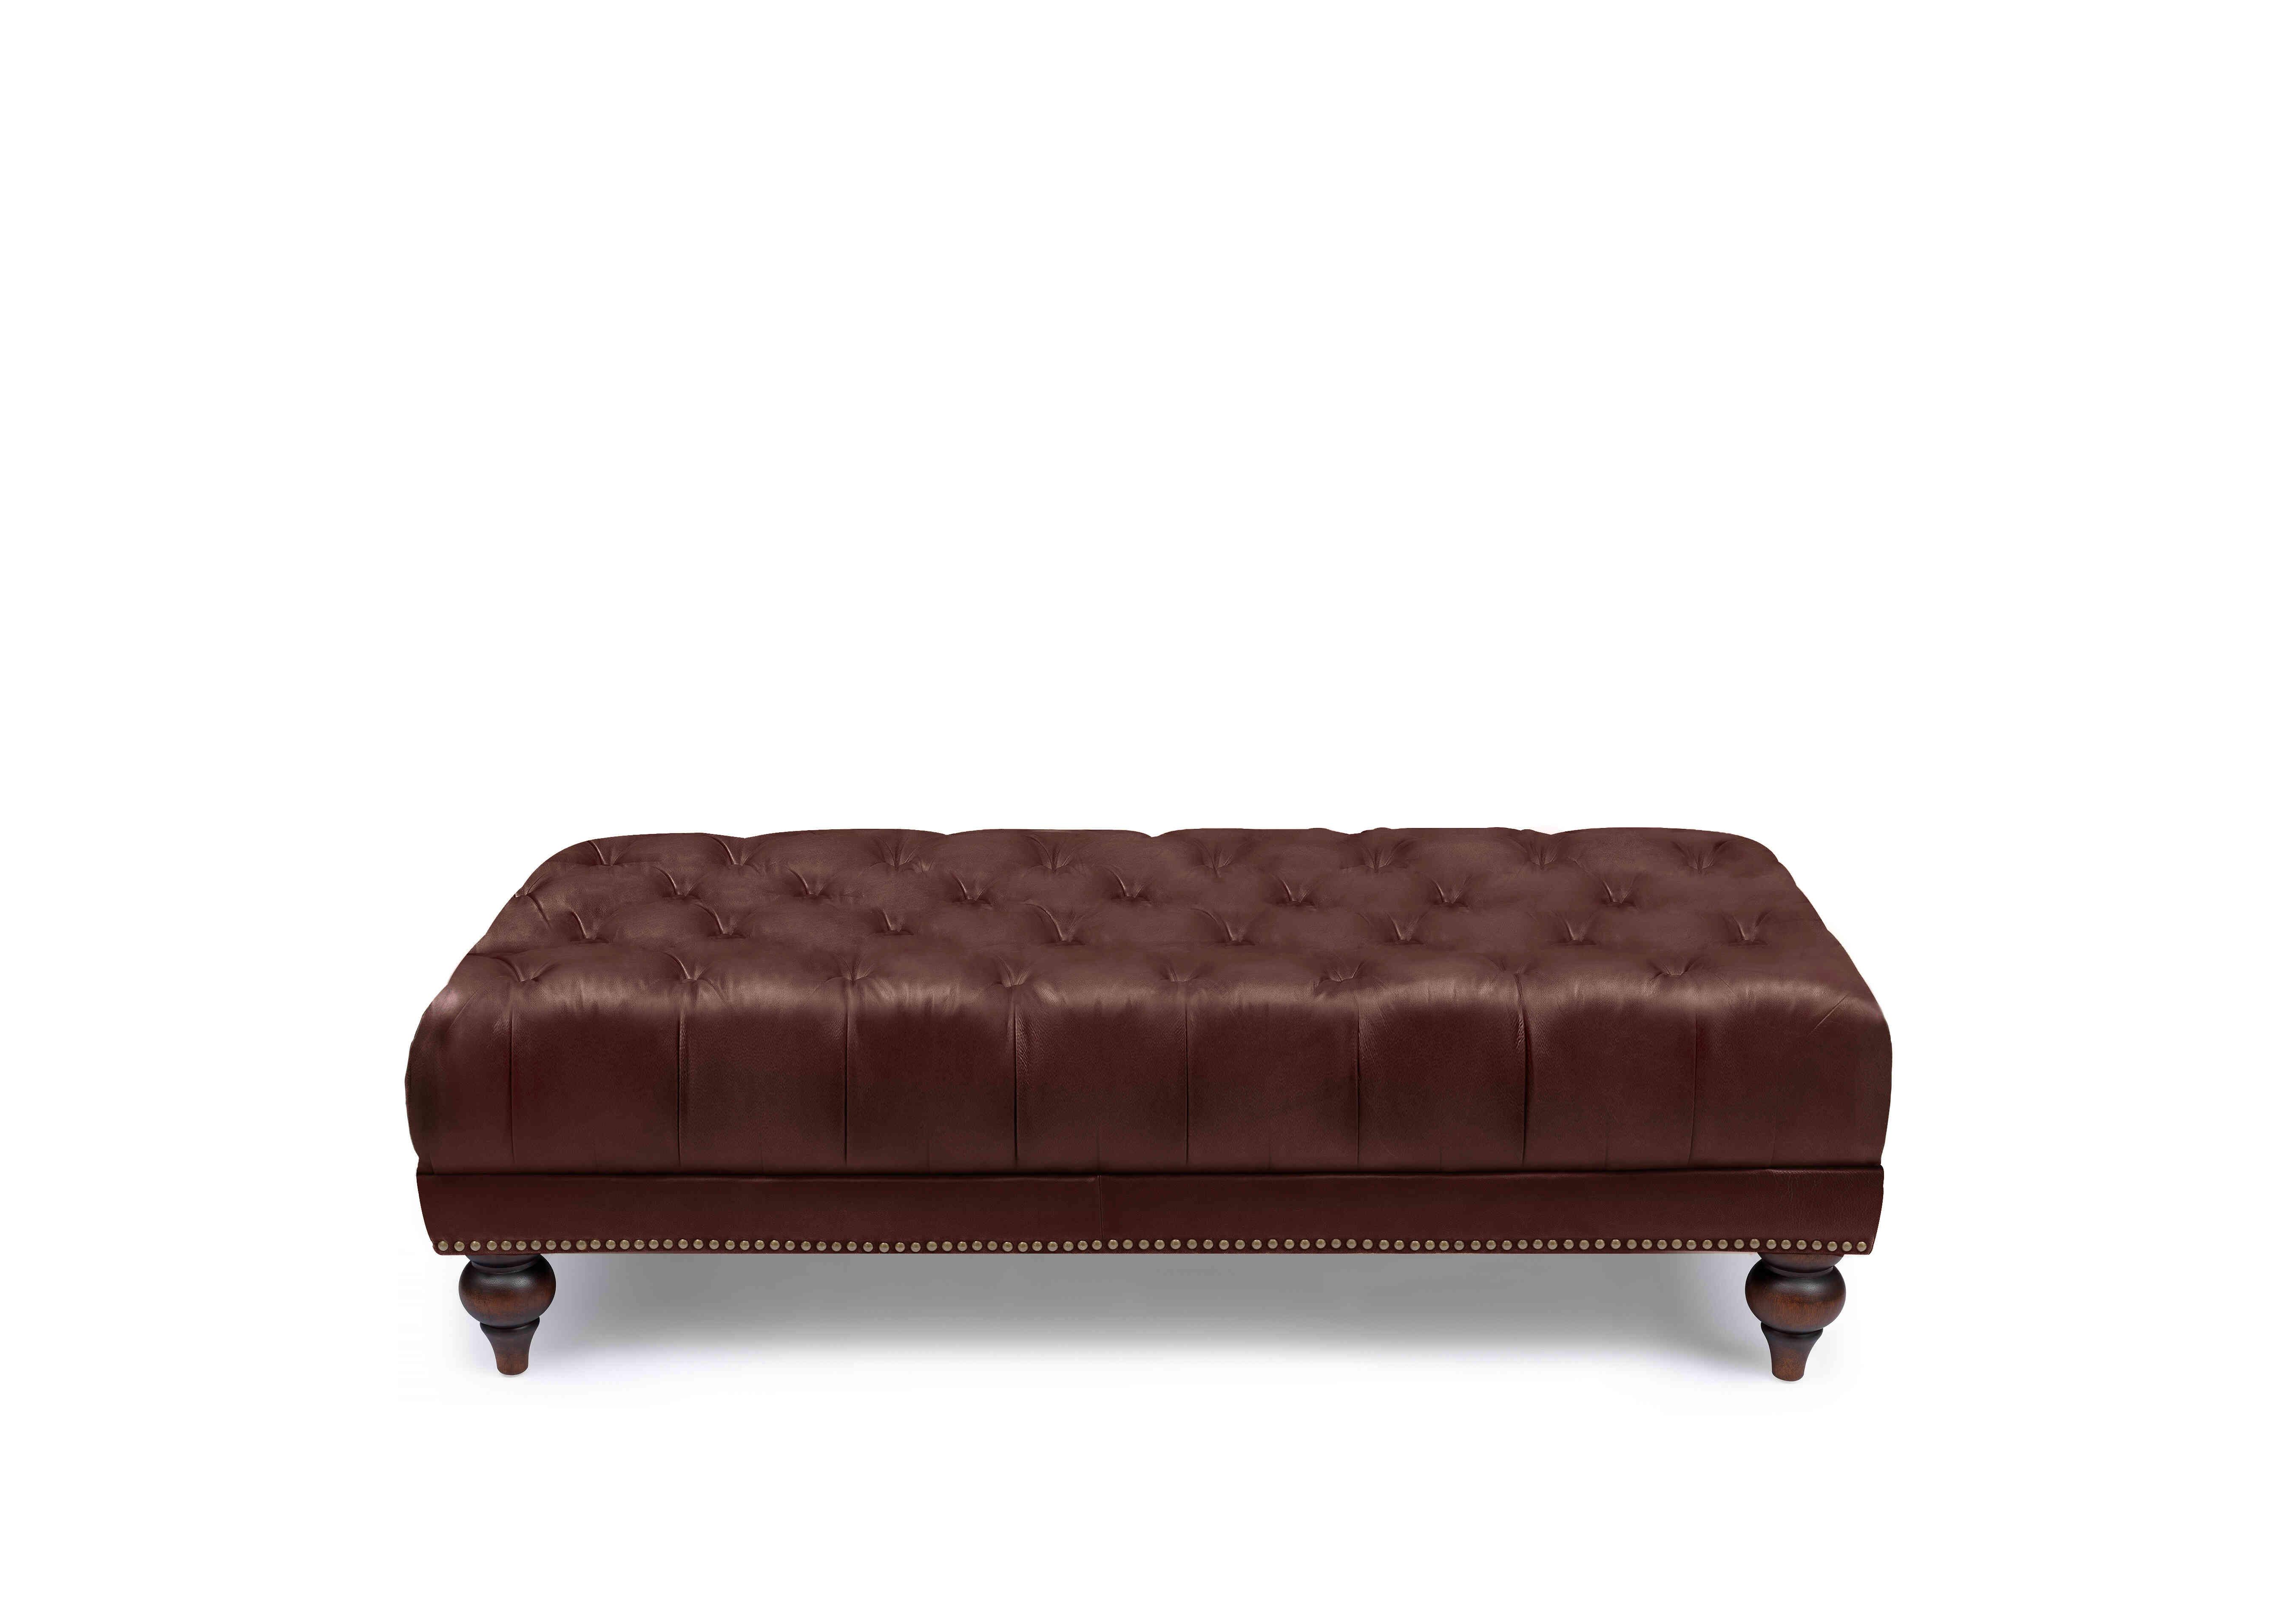 Wallace Leather Rectangular Footstool with Turned Feet in X3y1-1964ls Merlot on Furniture Village